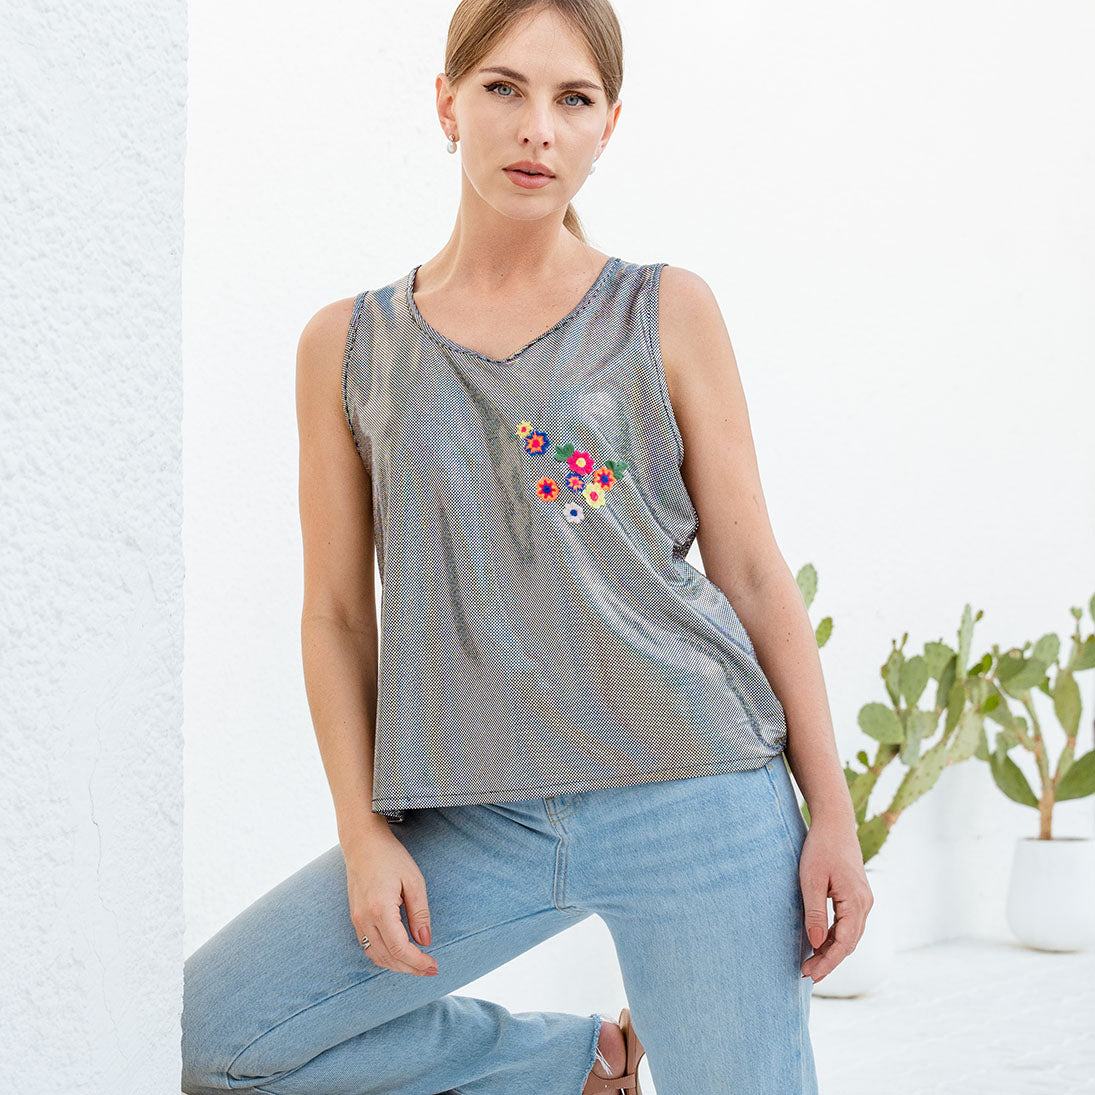 Metallic top with floral embroidery